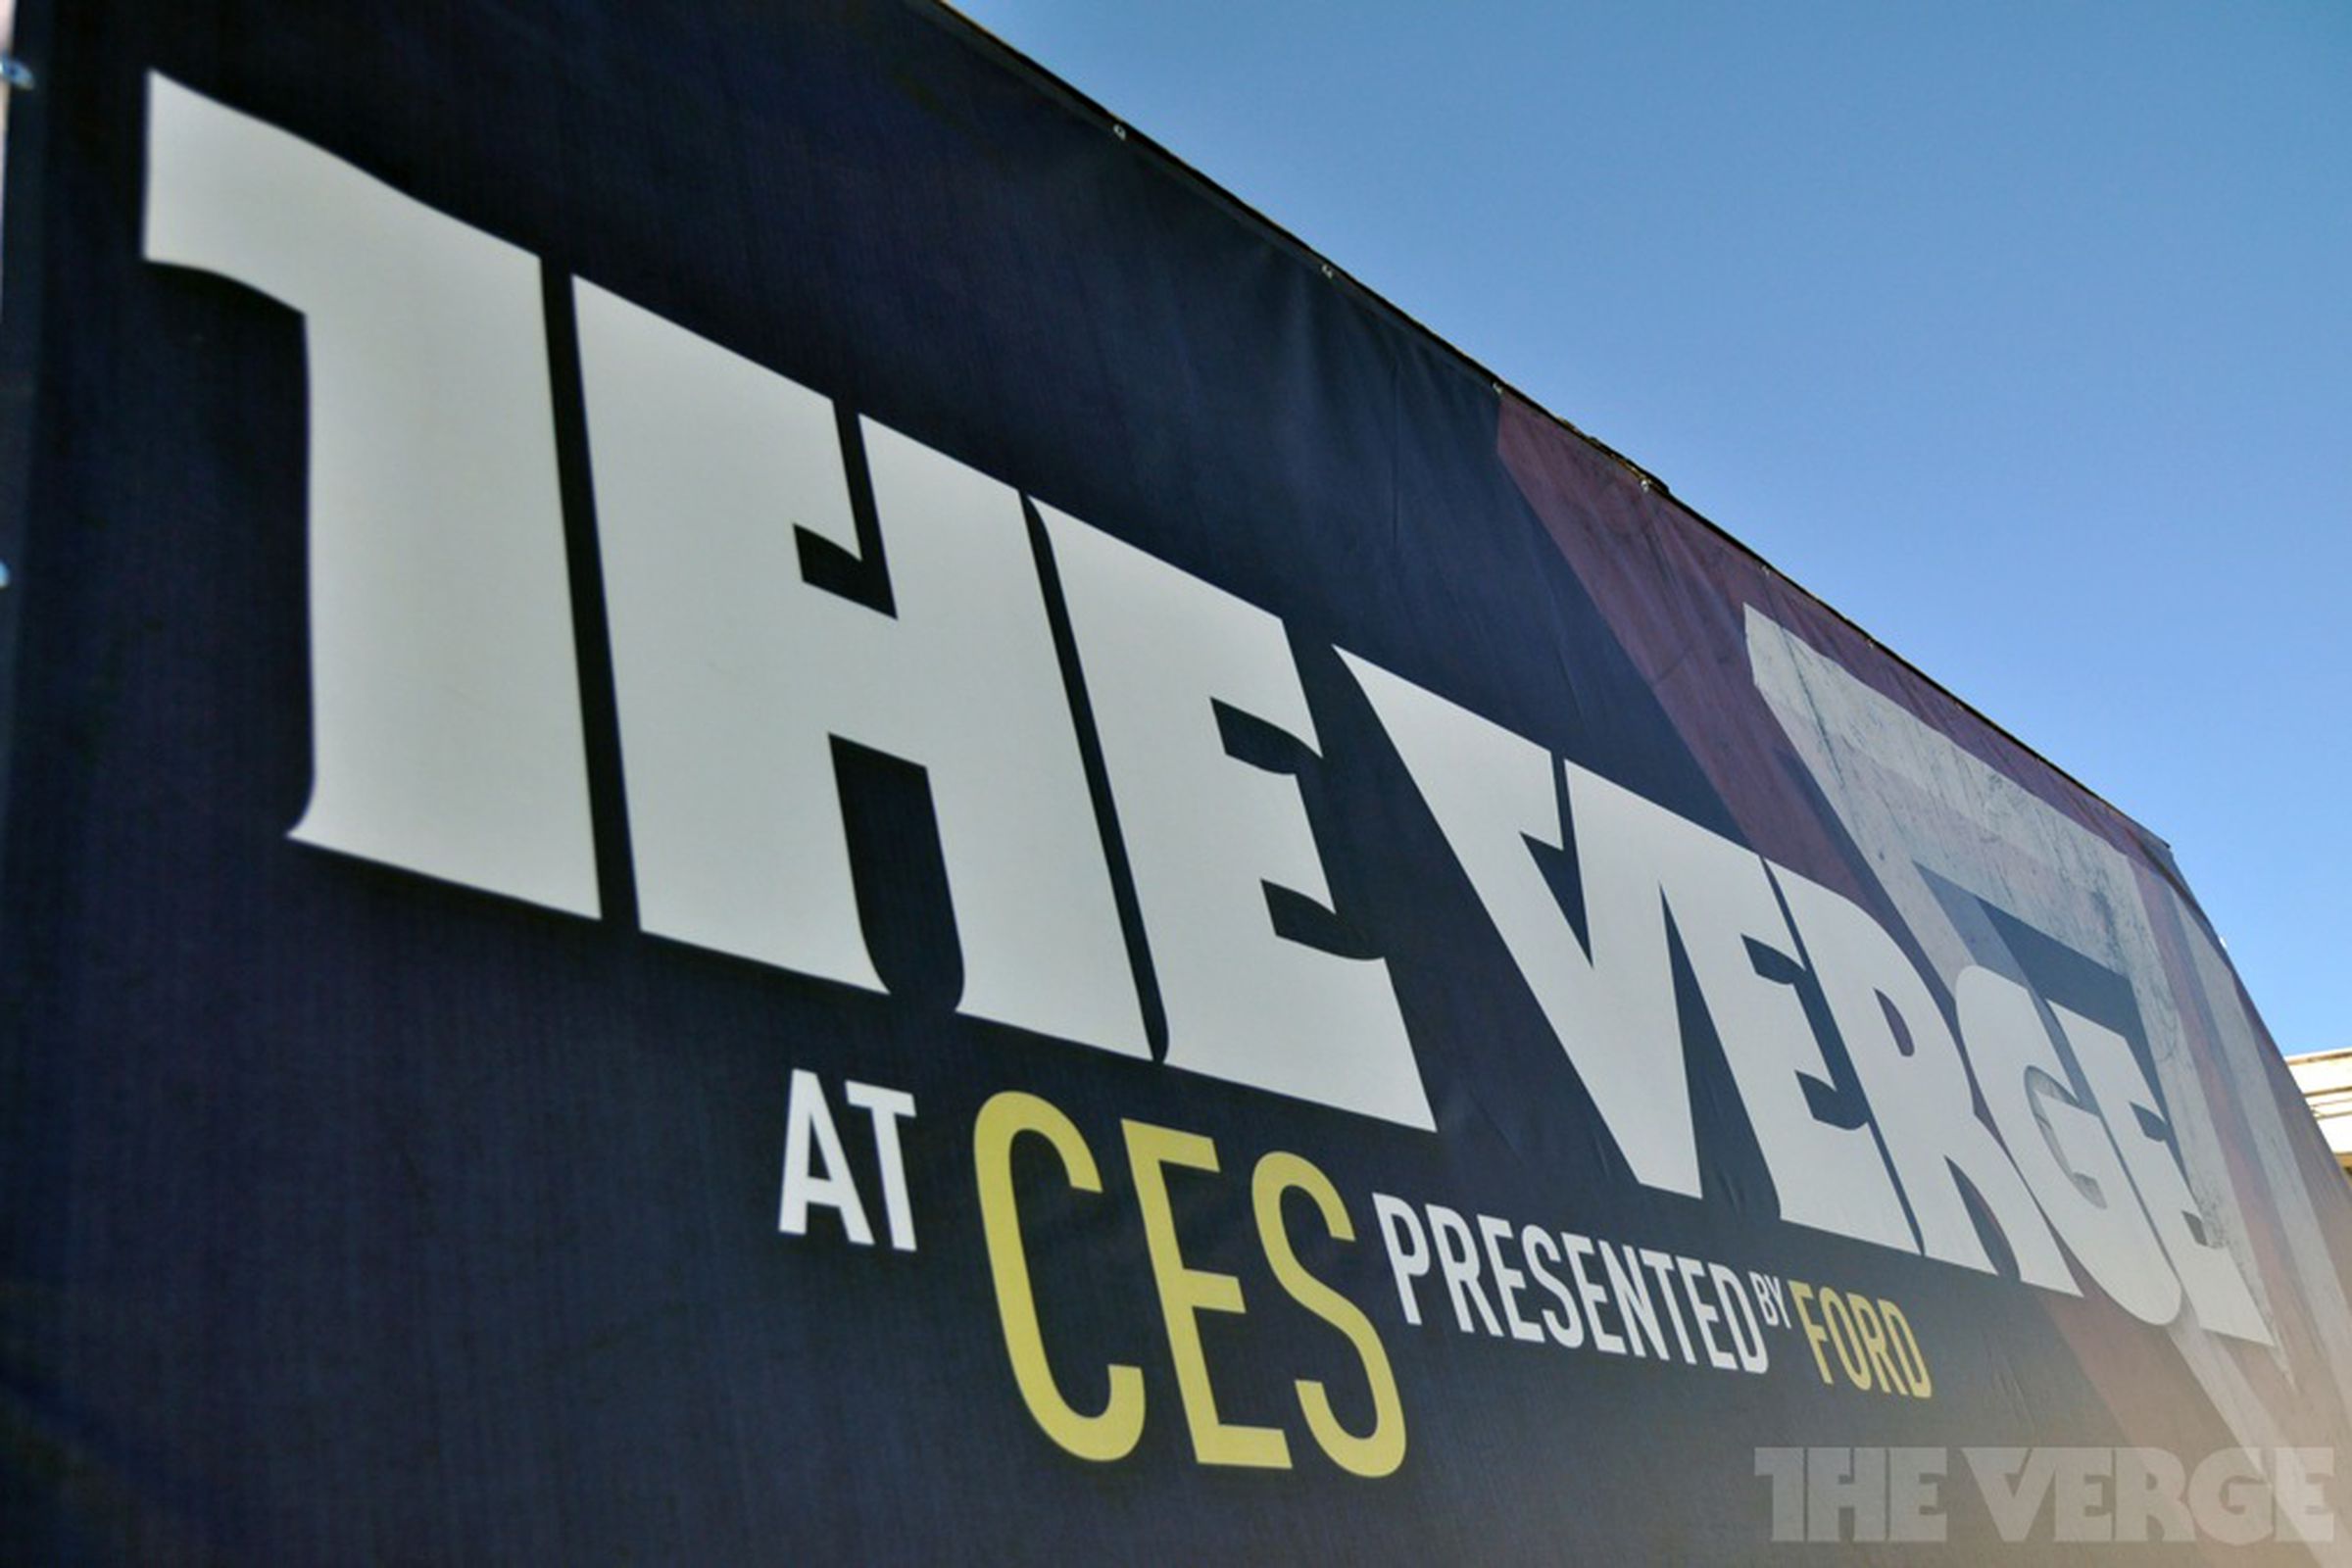 Gallery Photo: The Verge live at CES 2012